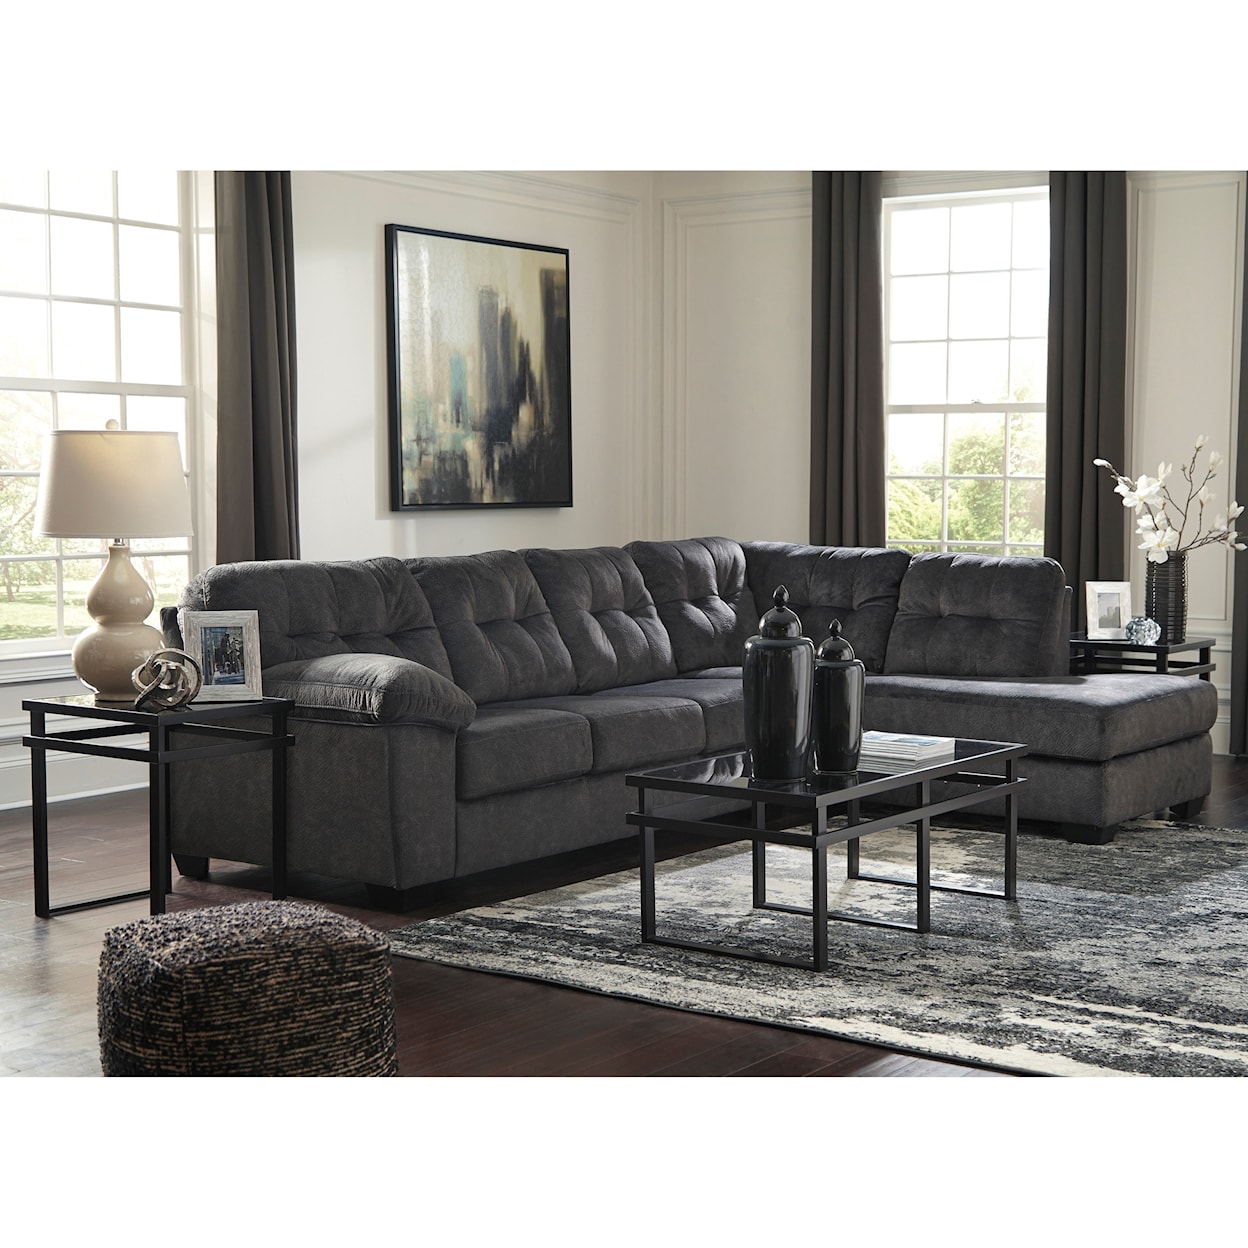 Ashley Furniture Signature Design Accrington Sectional with Right Chaise